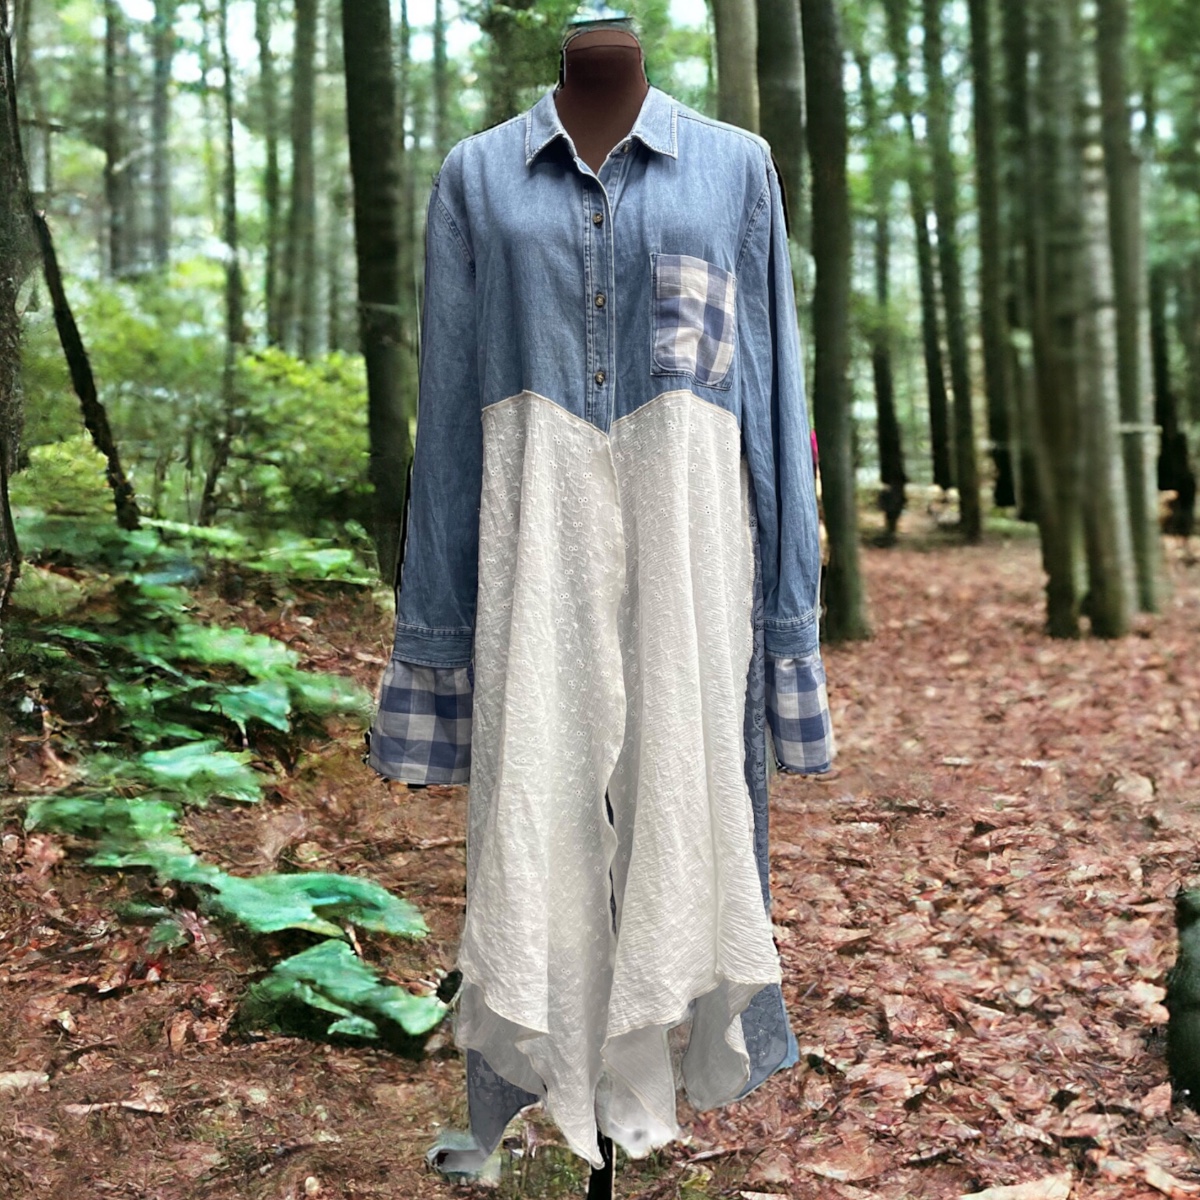 A mannequin wearing a denim shirt in the woods.